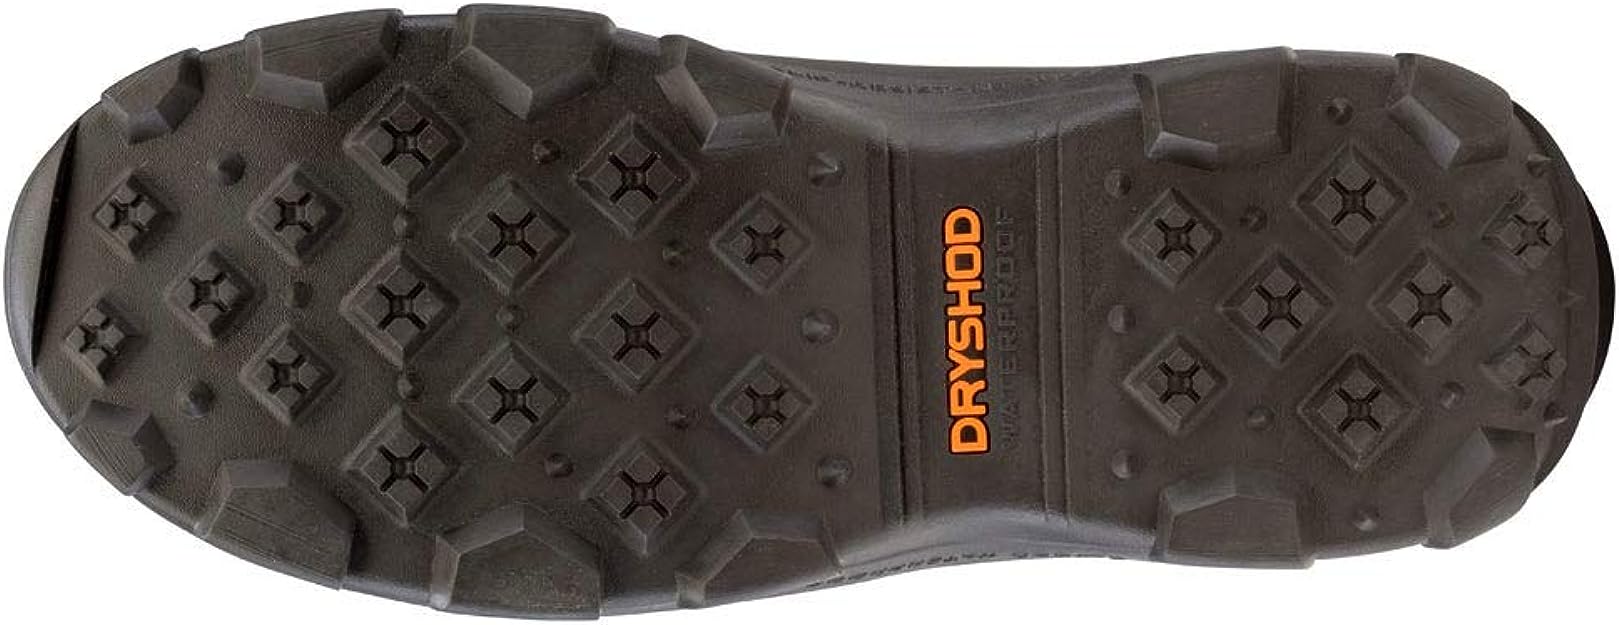 Dryshod Men's Viperstop Snake Hunting Waterproof Insulated Boots With Gusset